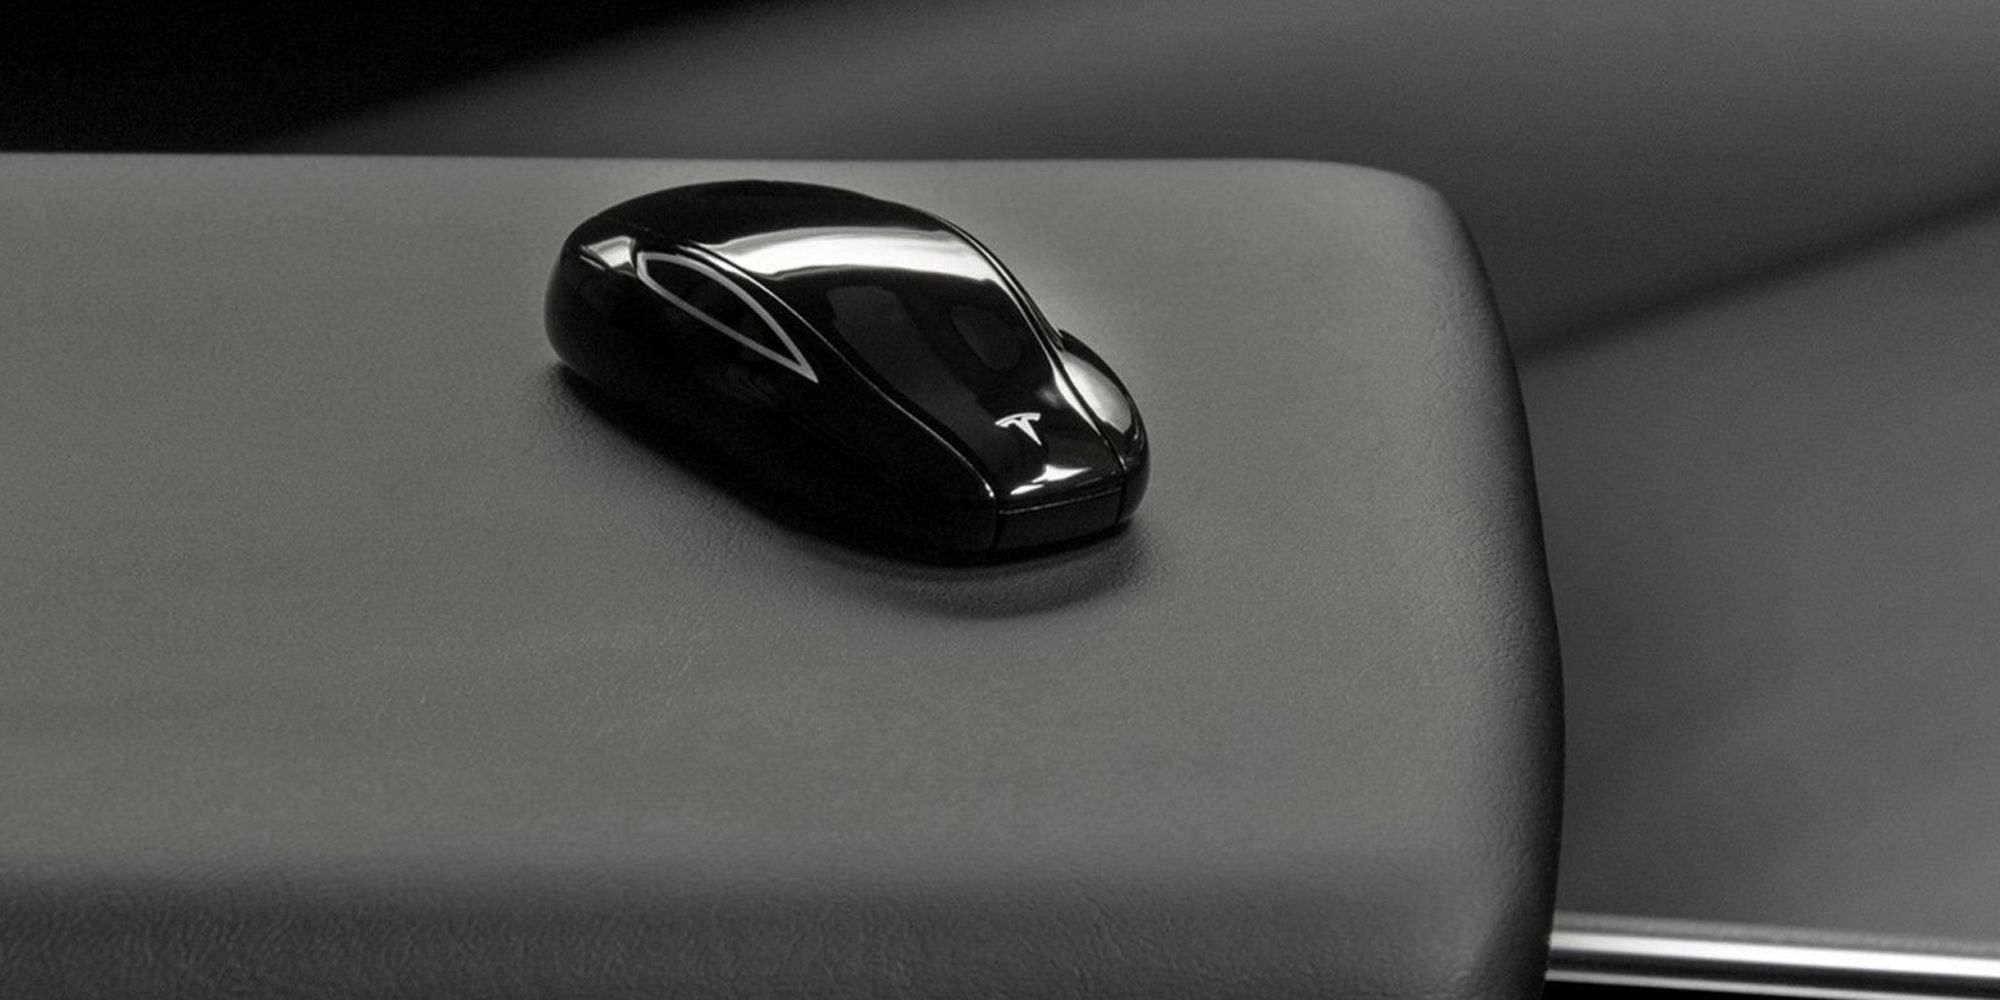 10 Of The Coolest Car Key Fobs We've Ever Seen